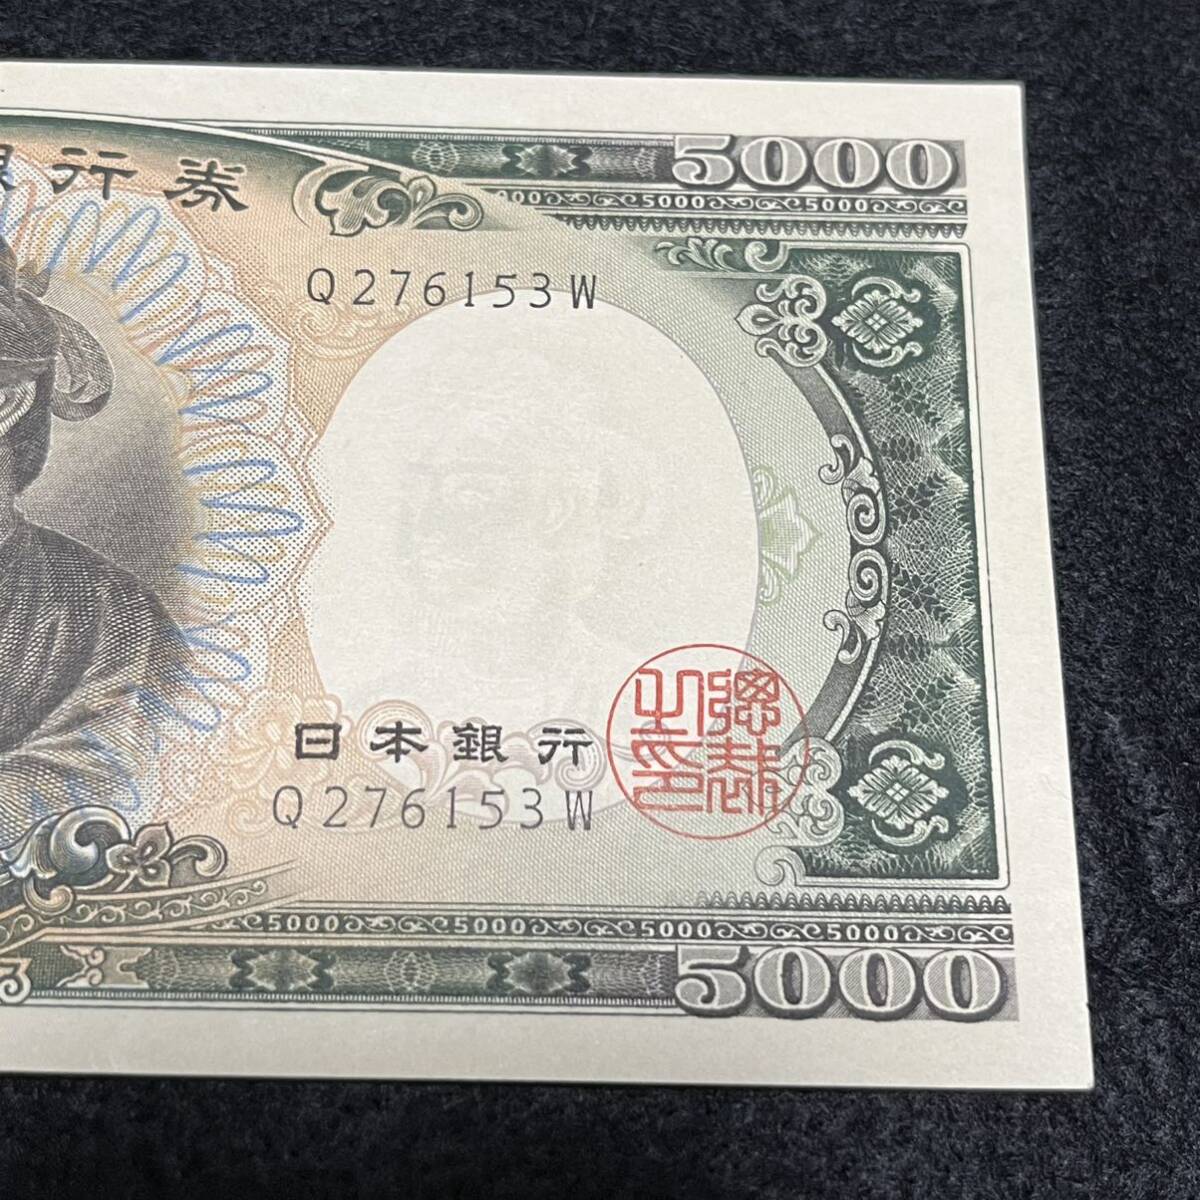 ( pin ., unused goods, non present ). virtue futoshi .Q276153W. thousand jpy note Japan Bank ticket collection antique old note . thousand jpy . old .